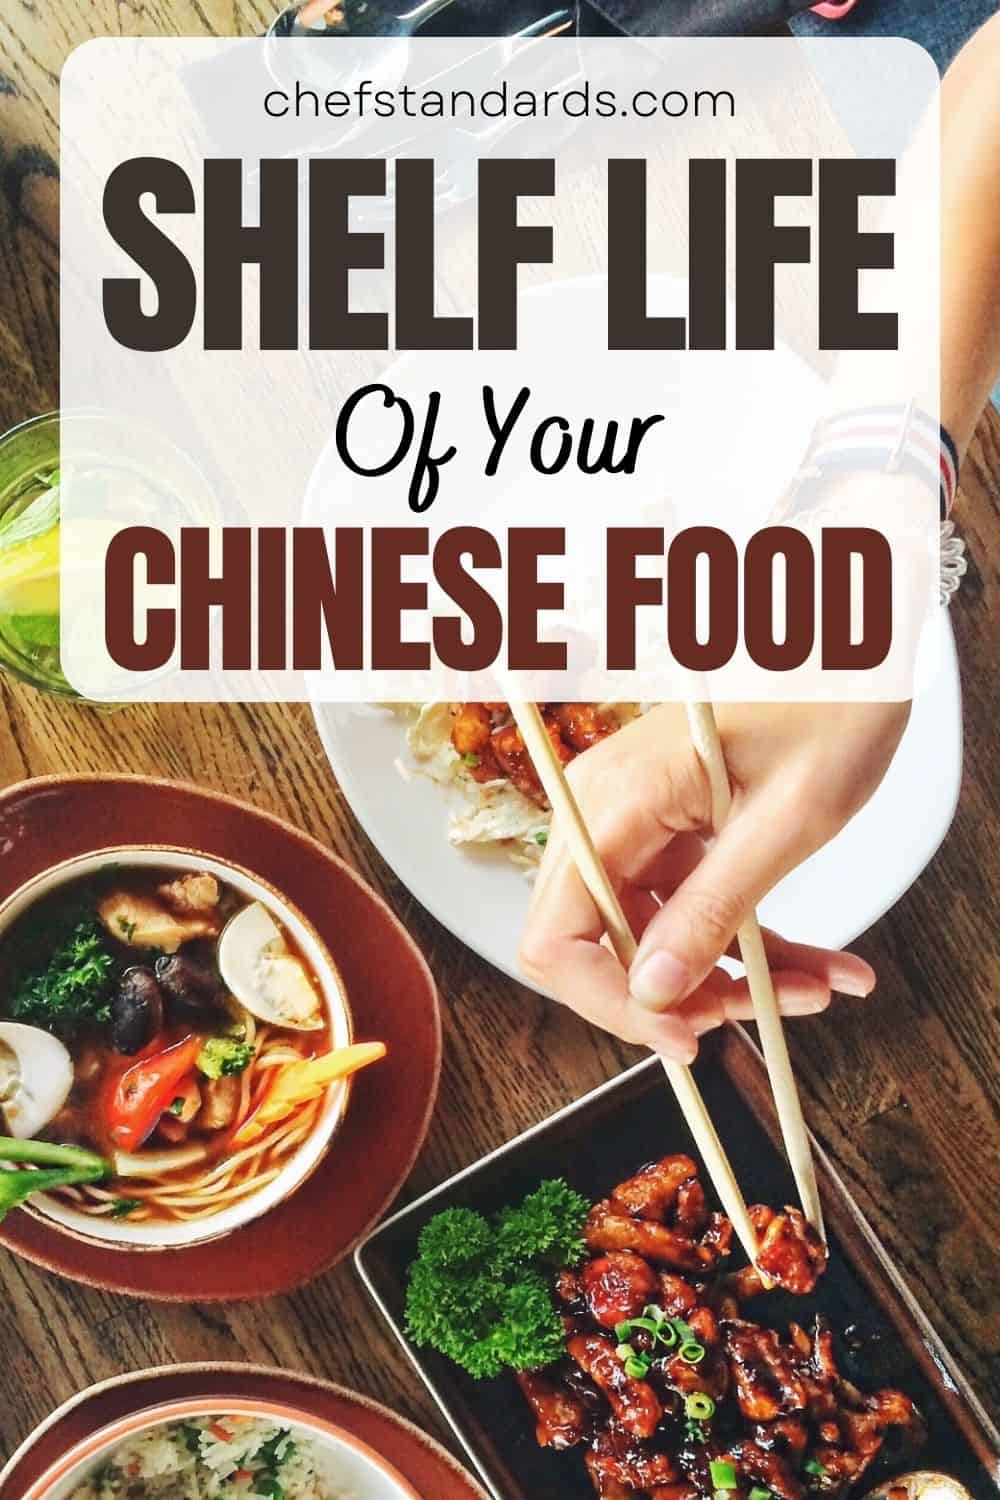 How Long Is Chinese Food Good For + Main Storage Tips
